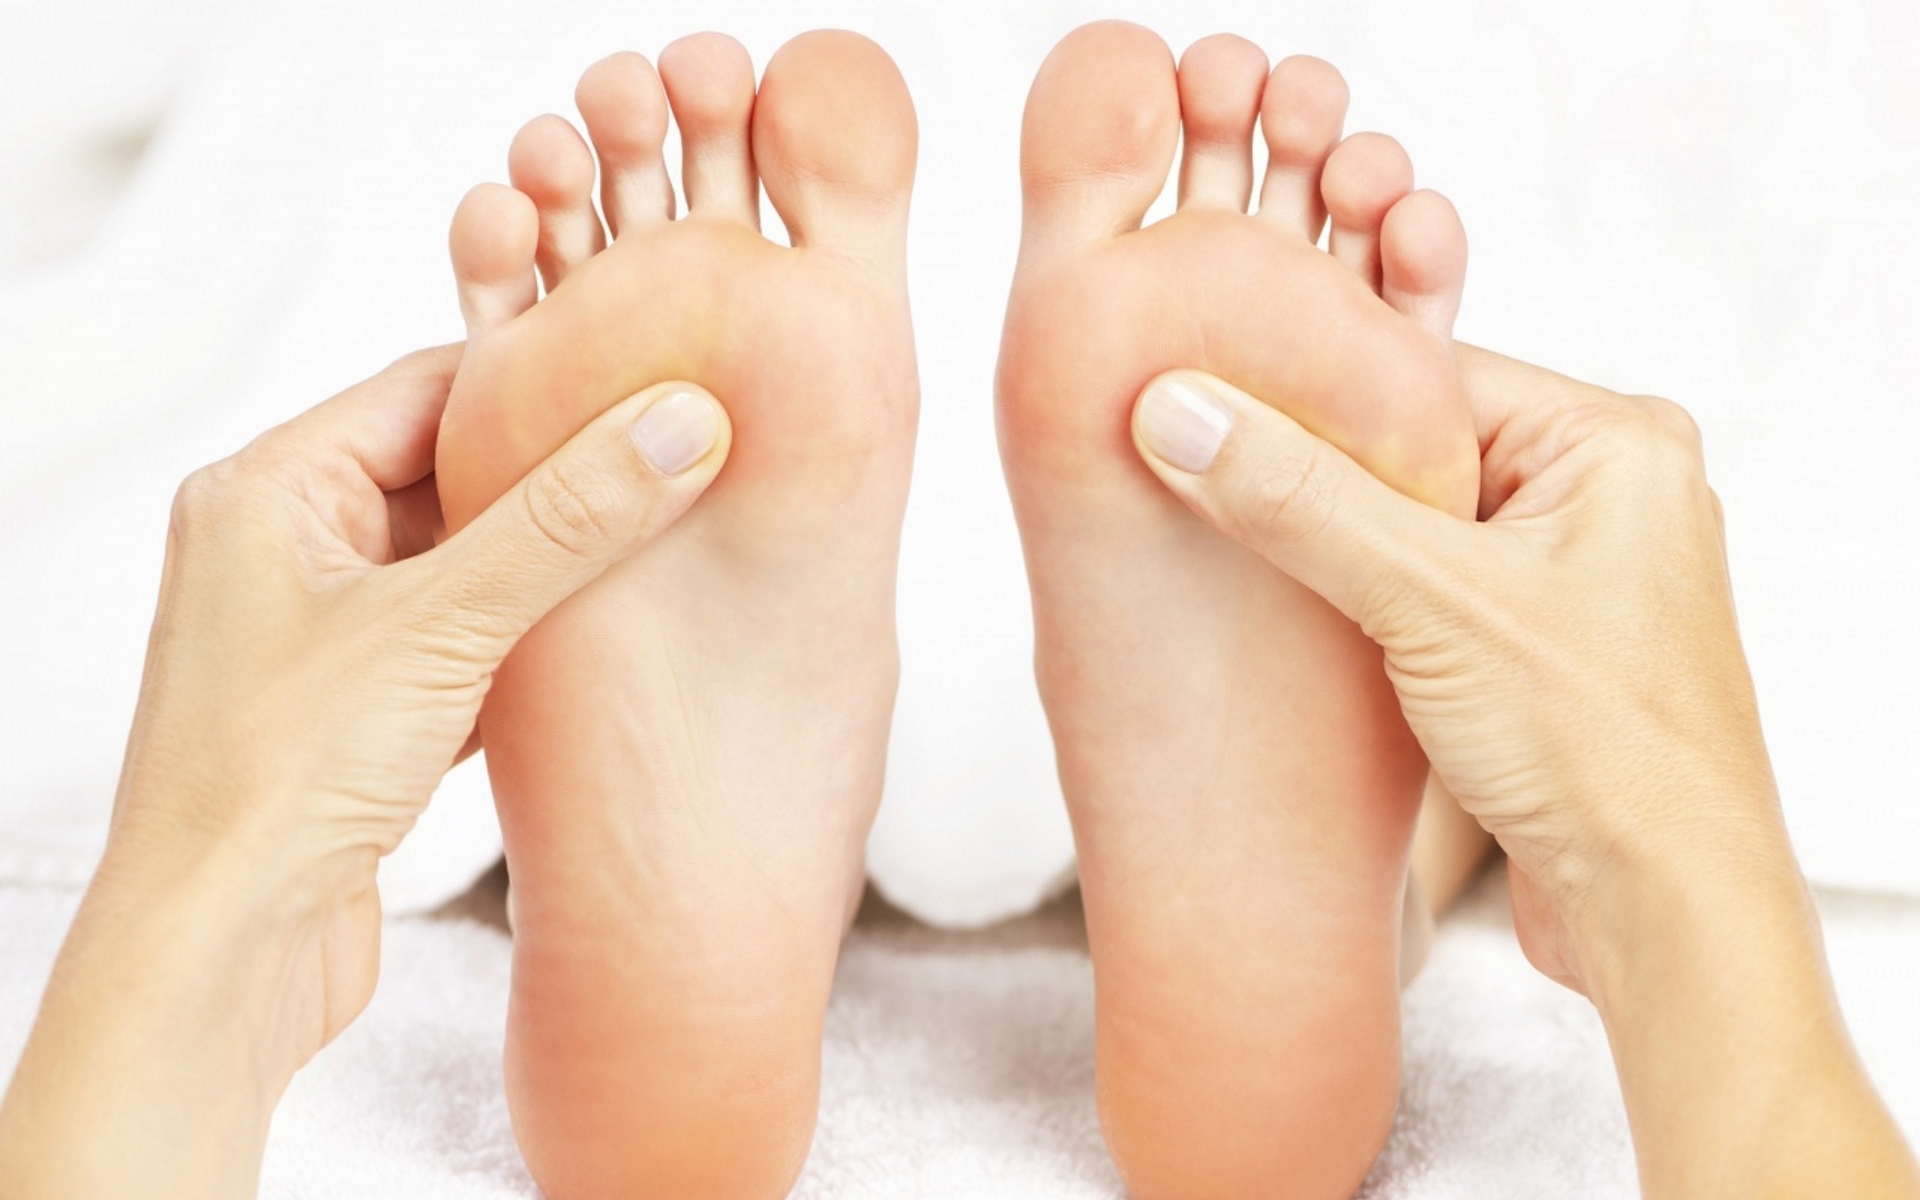 Massage Techniques For Foot Pain - Kawartha Care Wellness Centre â€“ Chiropractic, Acupuncture ...